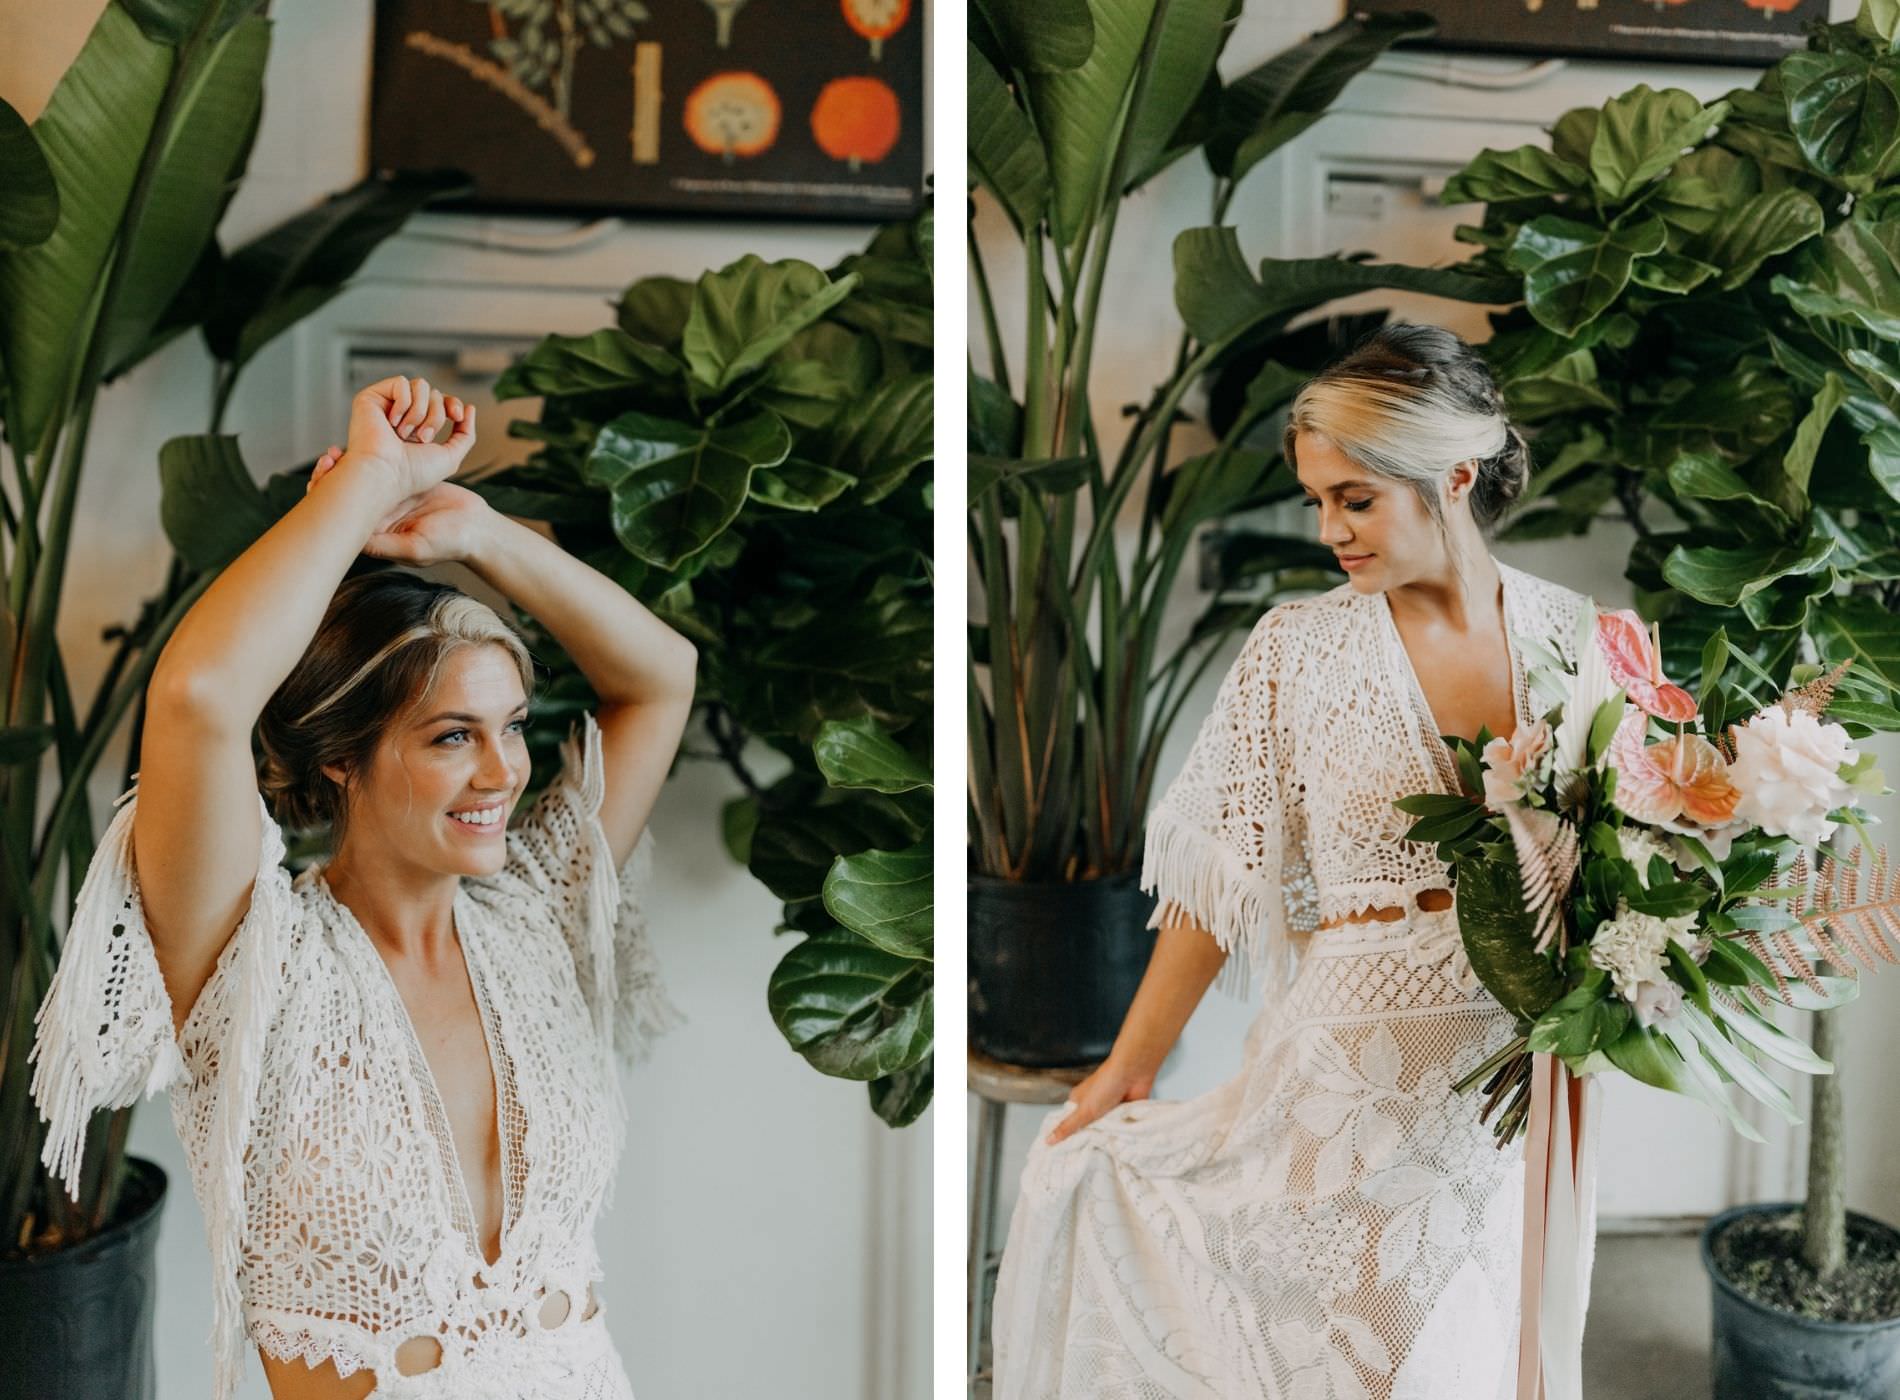 Boho Neutral Styled Shoot | Bride in Bohemian Delicate Floral Lace and Illusion, Fringe Short Sleeve and Plunging V Neckline with Cutouts on Waist Wedding Dress, Bride holding Floral Bouquet with White Feathers, Pink Anthurium, Palm Tree Leaves | Wedding Planner Elope Tampa Bay | Amber McWhorter Photography | St. Pete Wedding Venue Wild Roots